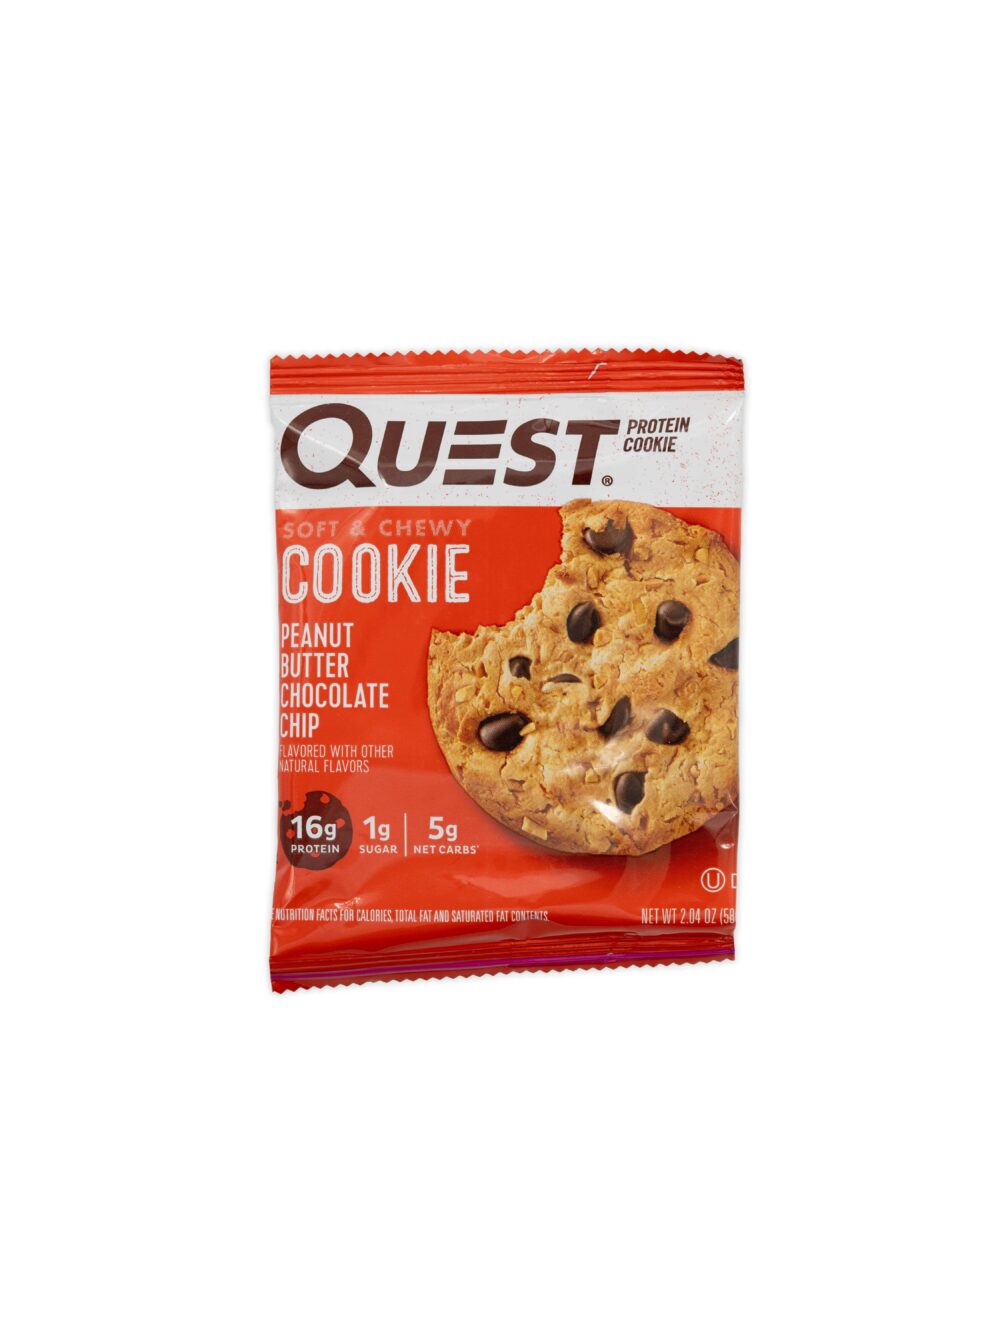 888849008049 Quest Penaut Butter Chocolate Chip FRONT min scaled